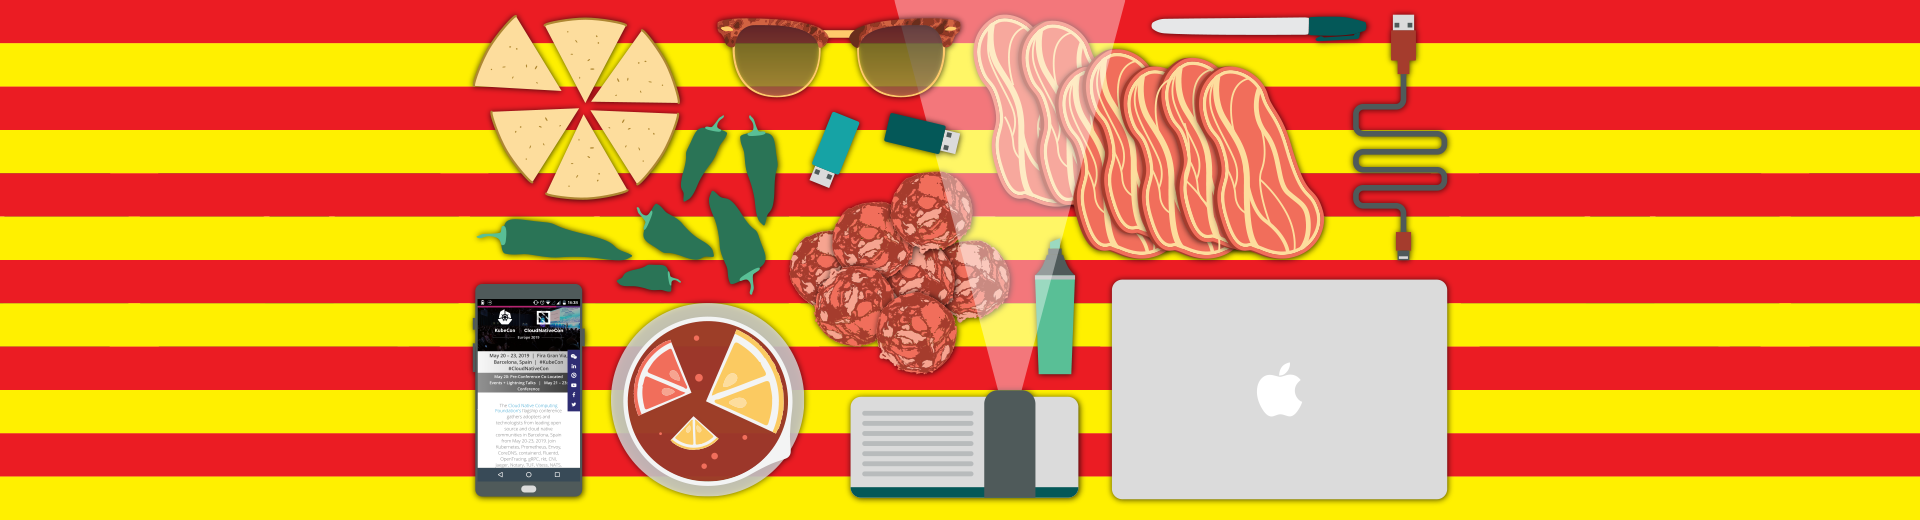 Some spanish food and some tech items (laptop etc) arranged on a Catalan flag background